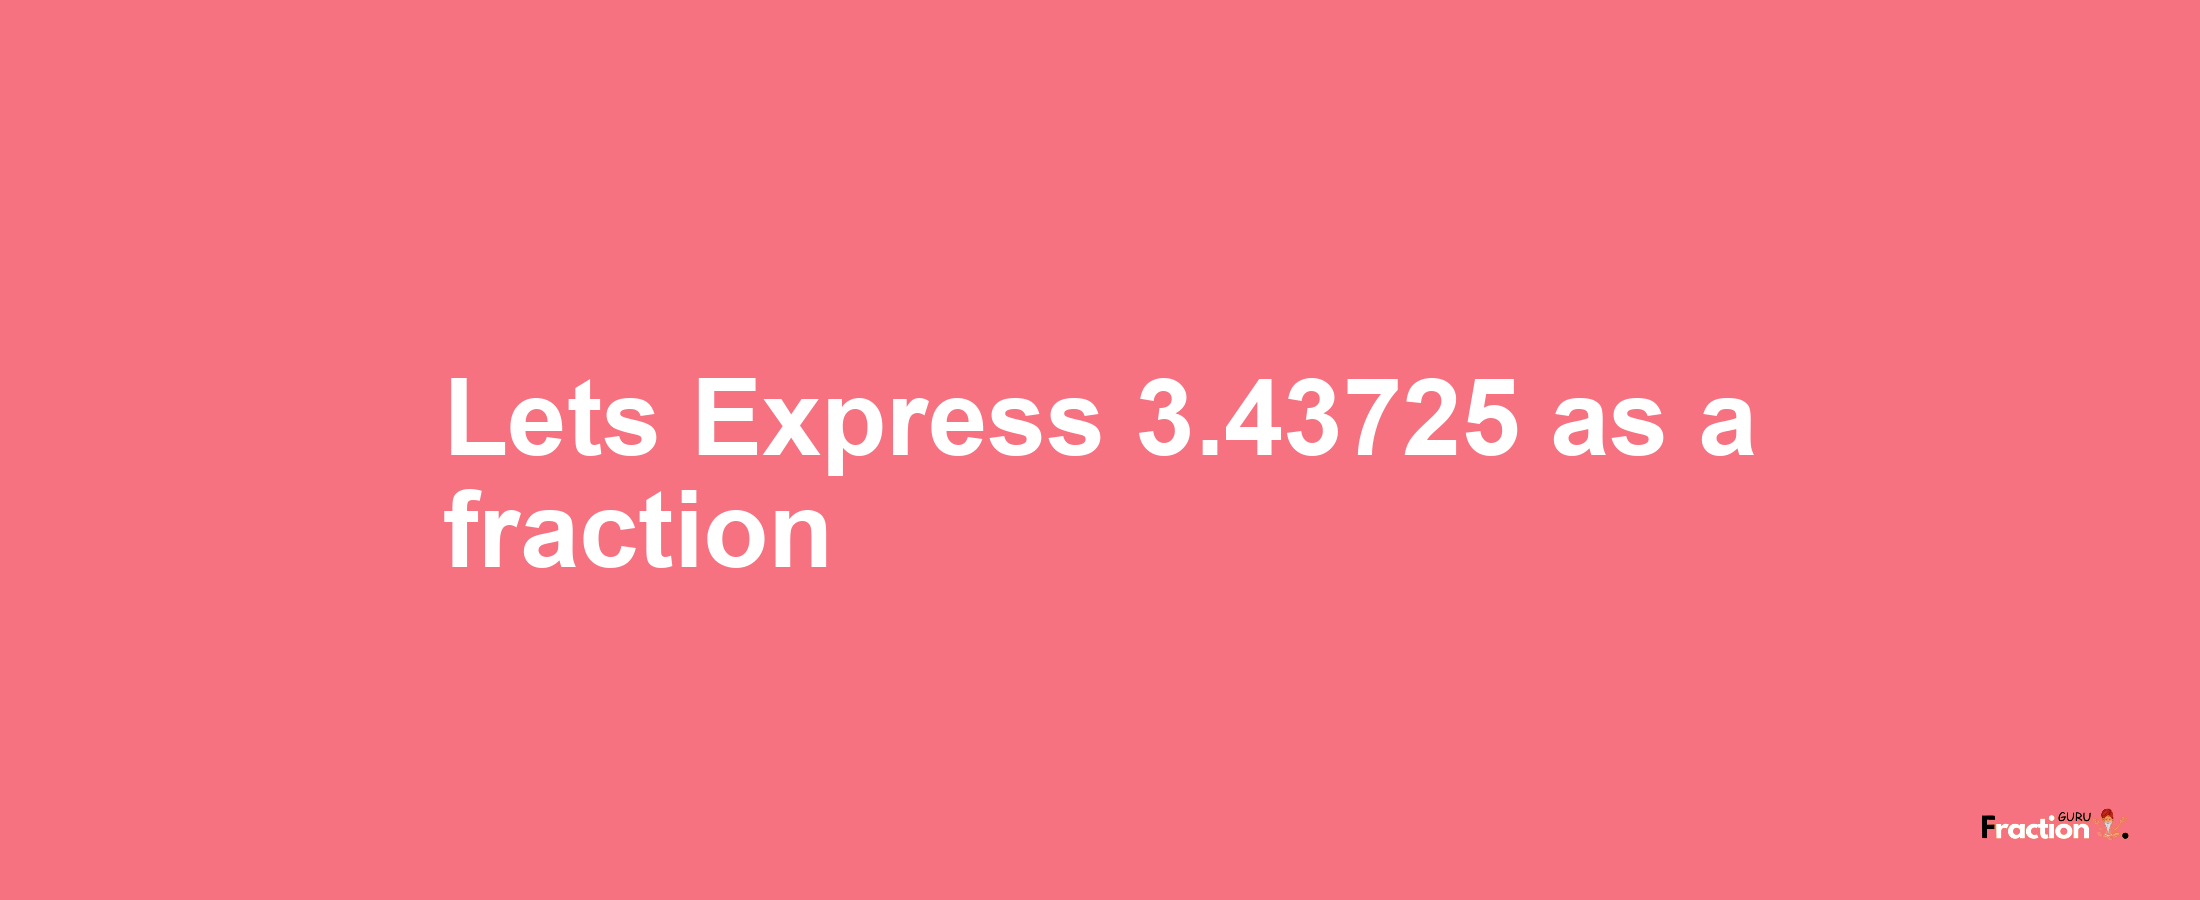 Lets Express 3.43725 as afraction